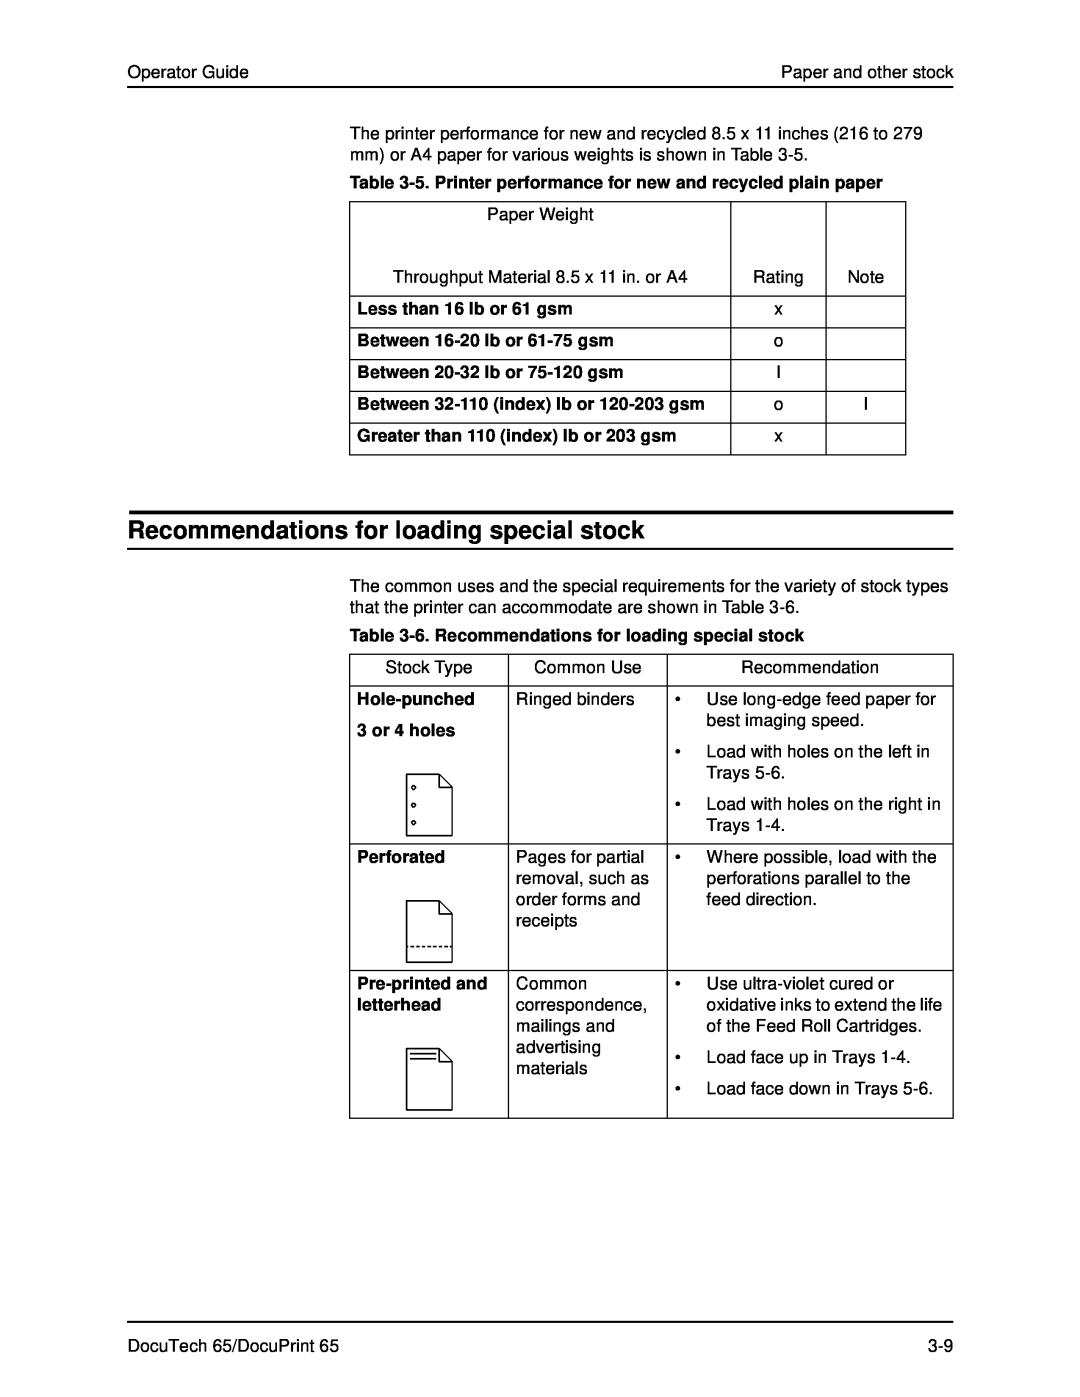 Xerox DOCUTECH 65 manual Recommendations for loading special stock, 5. Printer performance for new and recycled plain paper 